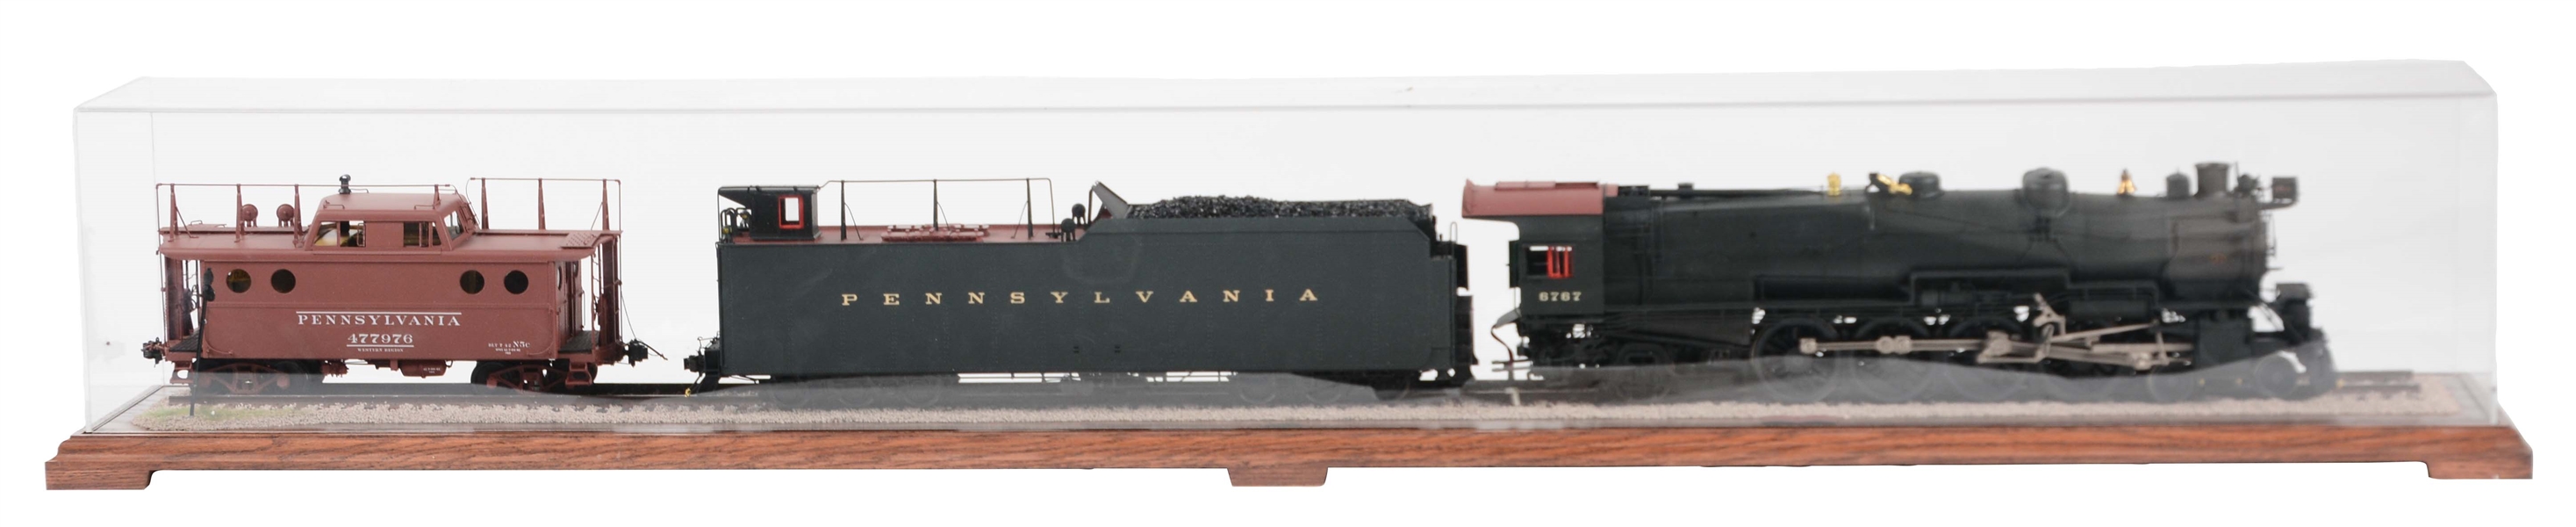 462 MOUNTAIN ENGINE & LONG HAUL TENDER & PRR CABOOSE IN DISPLAY CASE.